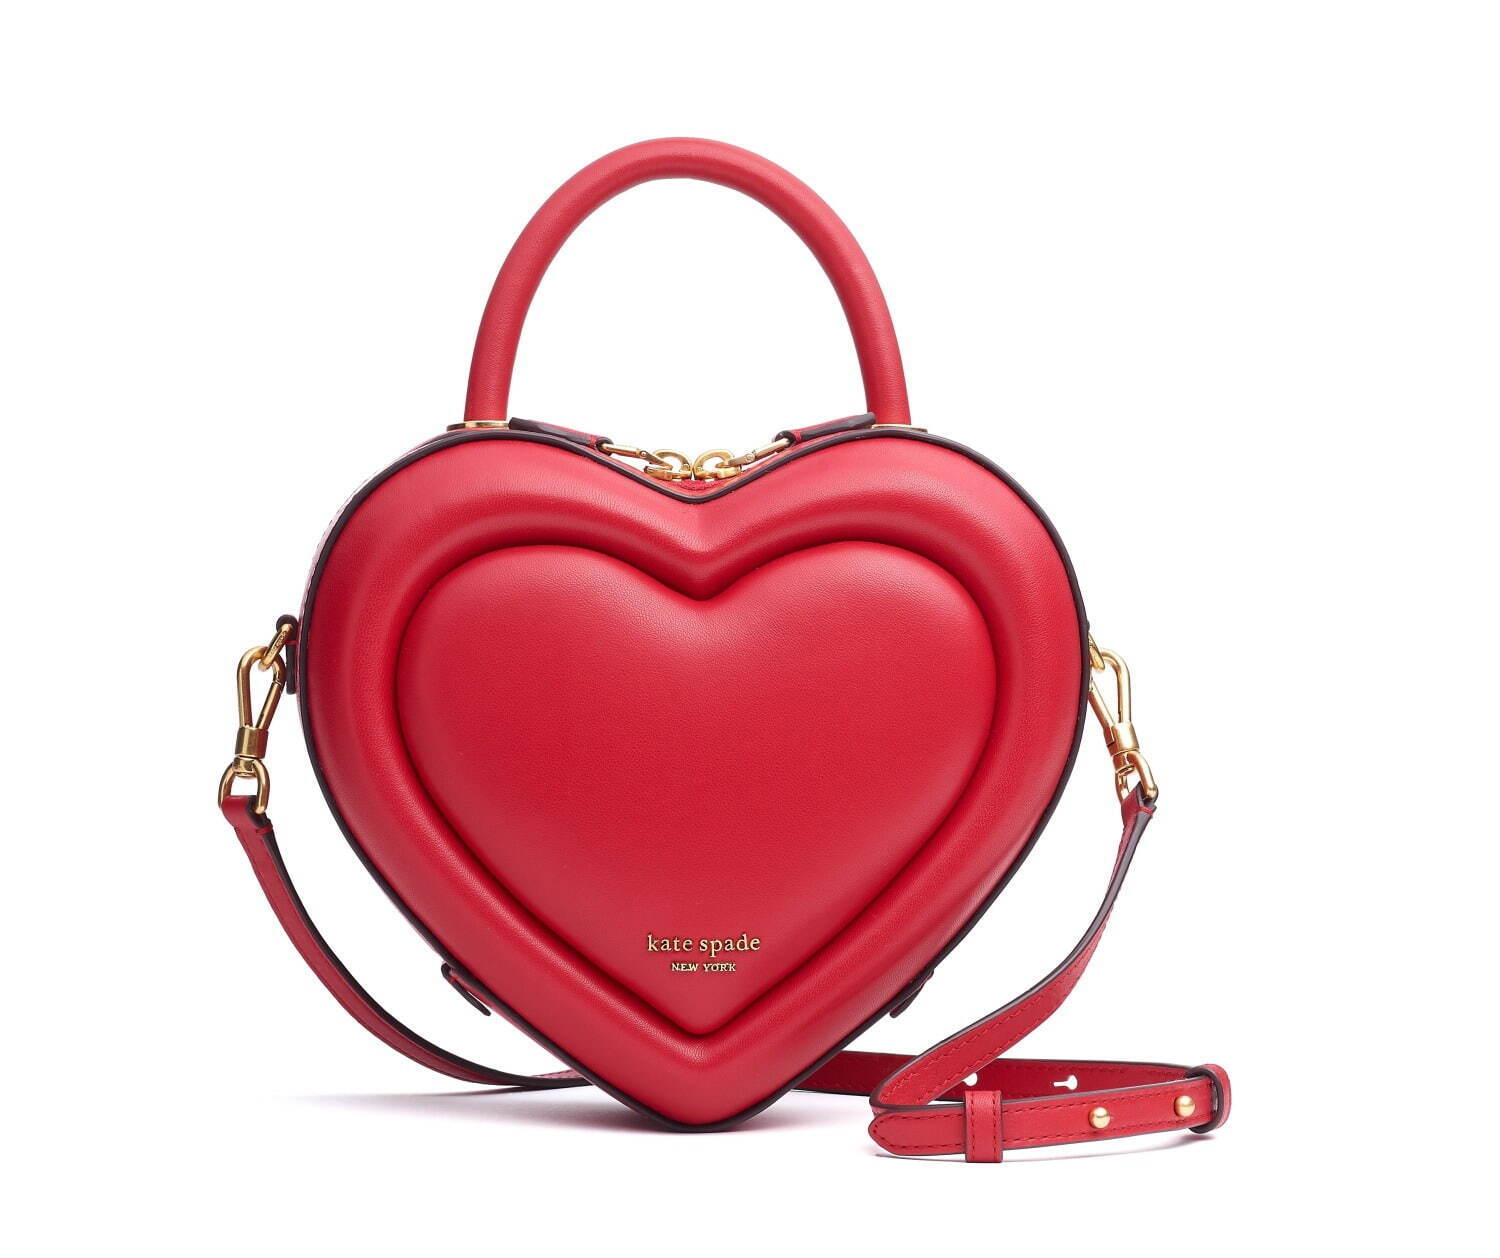 pitter patter smooth leather 3d heart crossbody 73,700円
(H19×W22×D9cm)